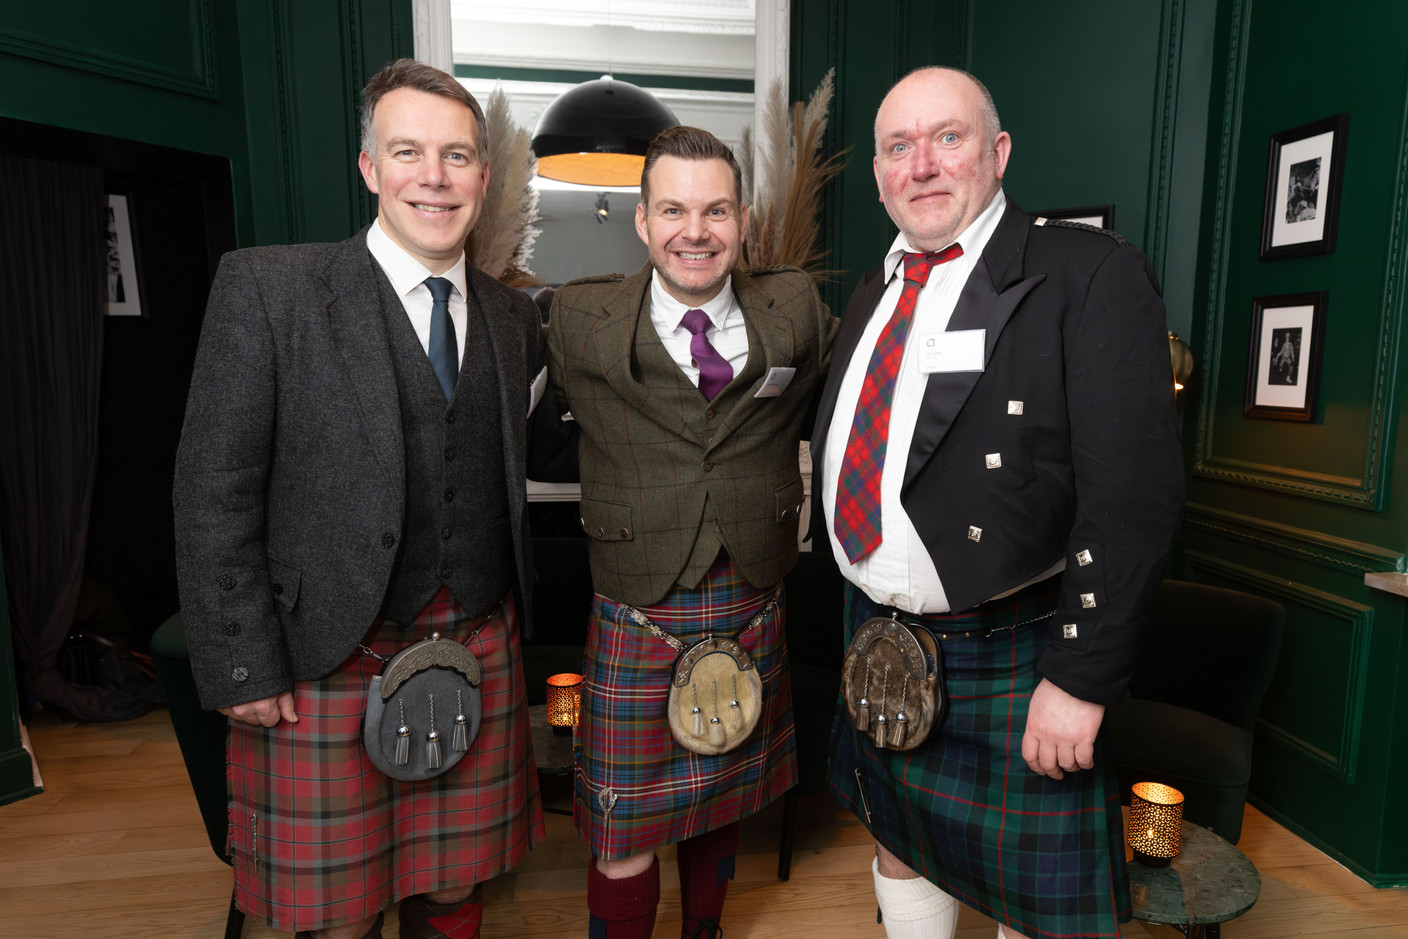 Bagpiper Blair Porter, Scottish whisky expert Stuart Cassells and Abrdn’s Ian Little seen during Abrdn’s “Outlook 2024 and Scottish Heritage Night” in Luxembourg City, 22 February 2024. Photo: Guy Wolff/Maison Moderne